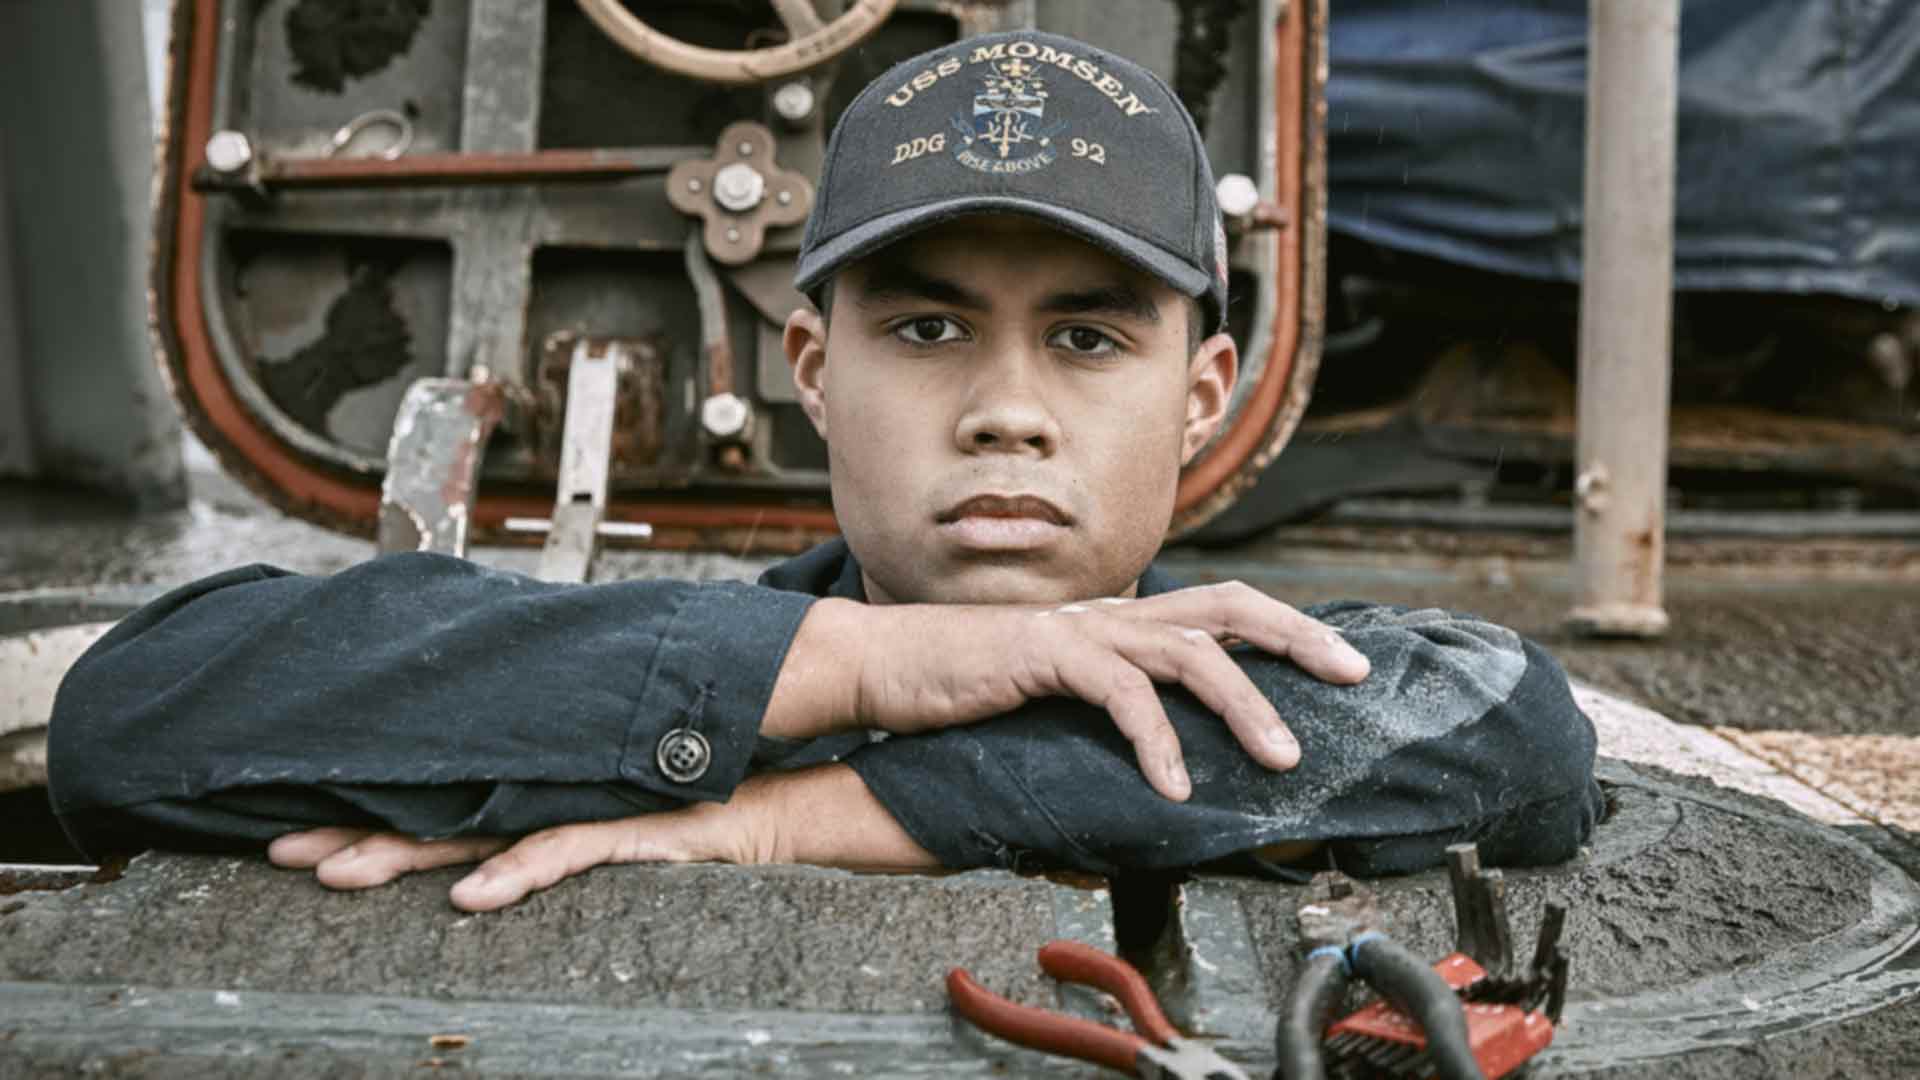 US Navy Boatswain Mate Michael Benitez poses for a photo aboard a US Navy aircraft carrier